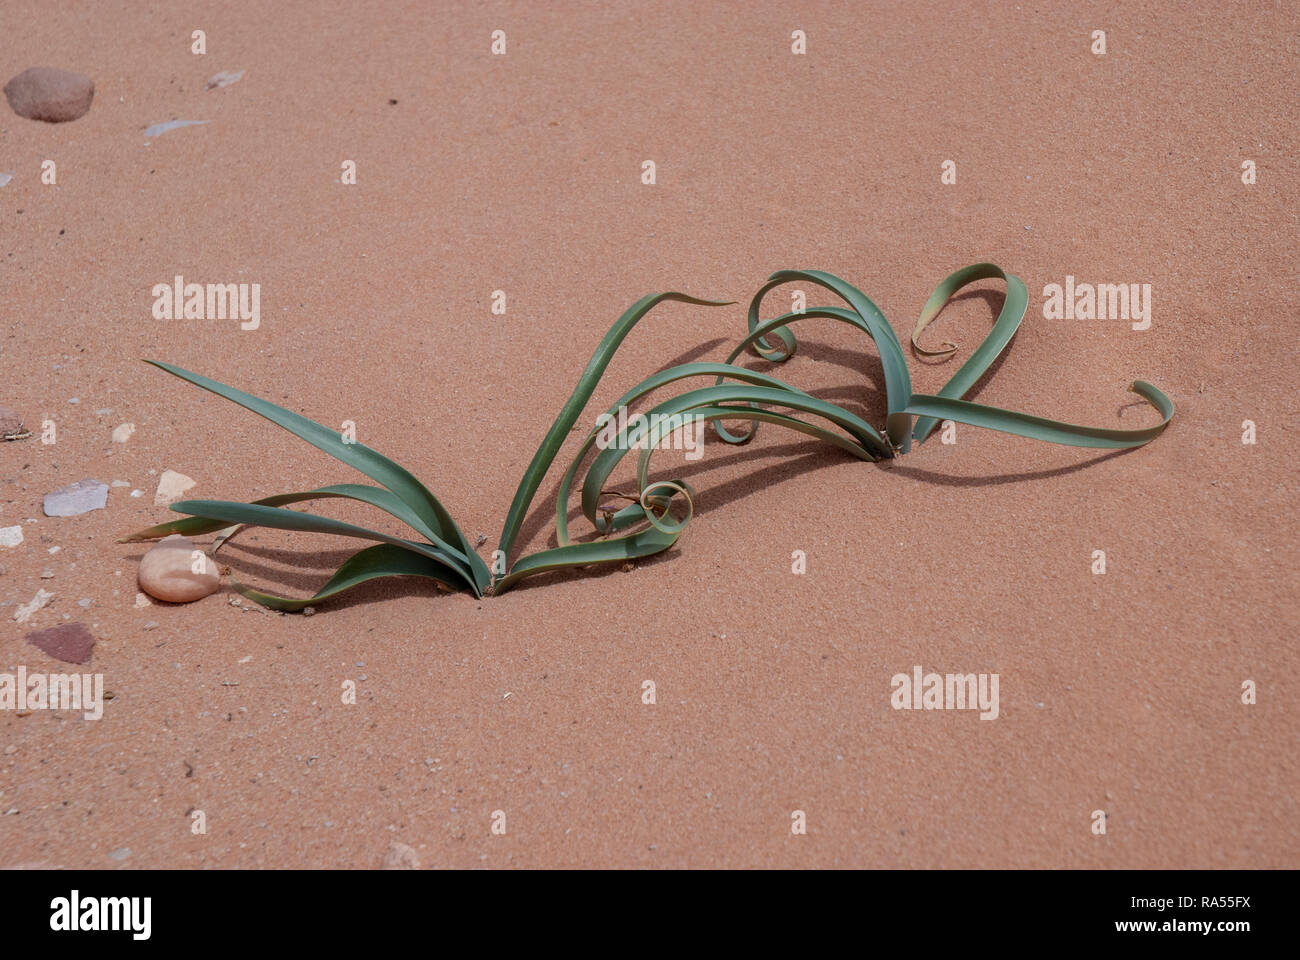 Growth out of hardship - green leafs grow out of the red desert sand Photographed in wadi rum, Jordan Stock Photo